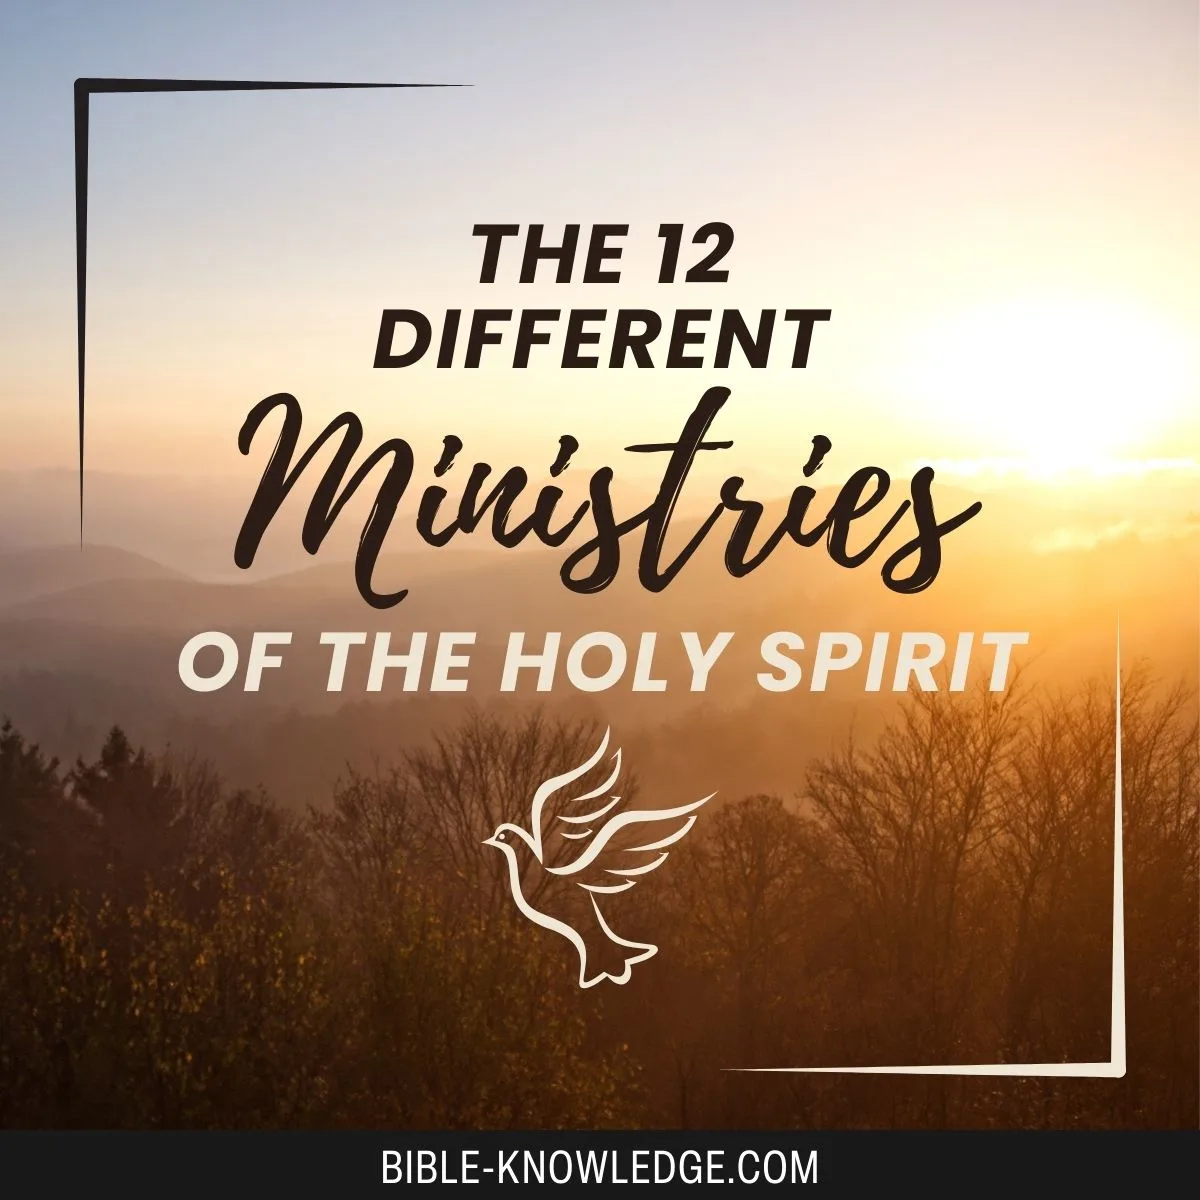 The 12 Different Ministries of the Holy Spirit